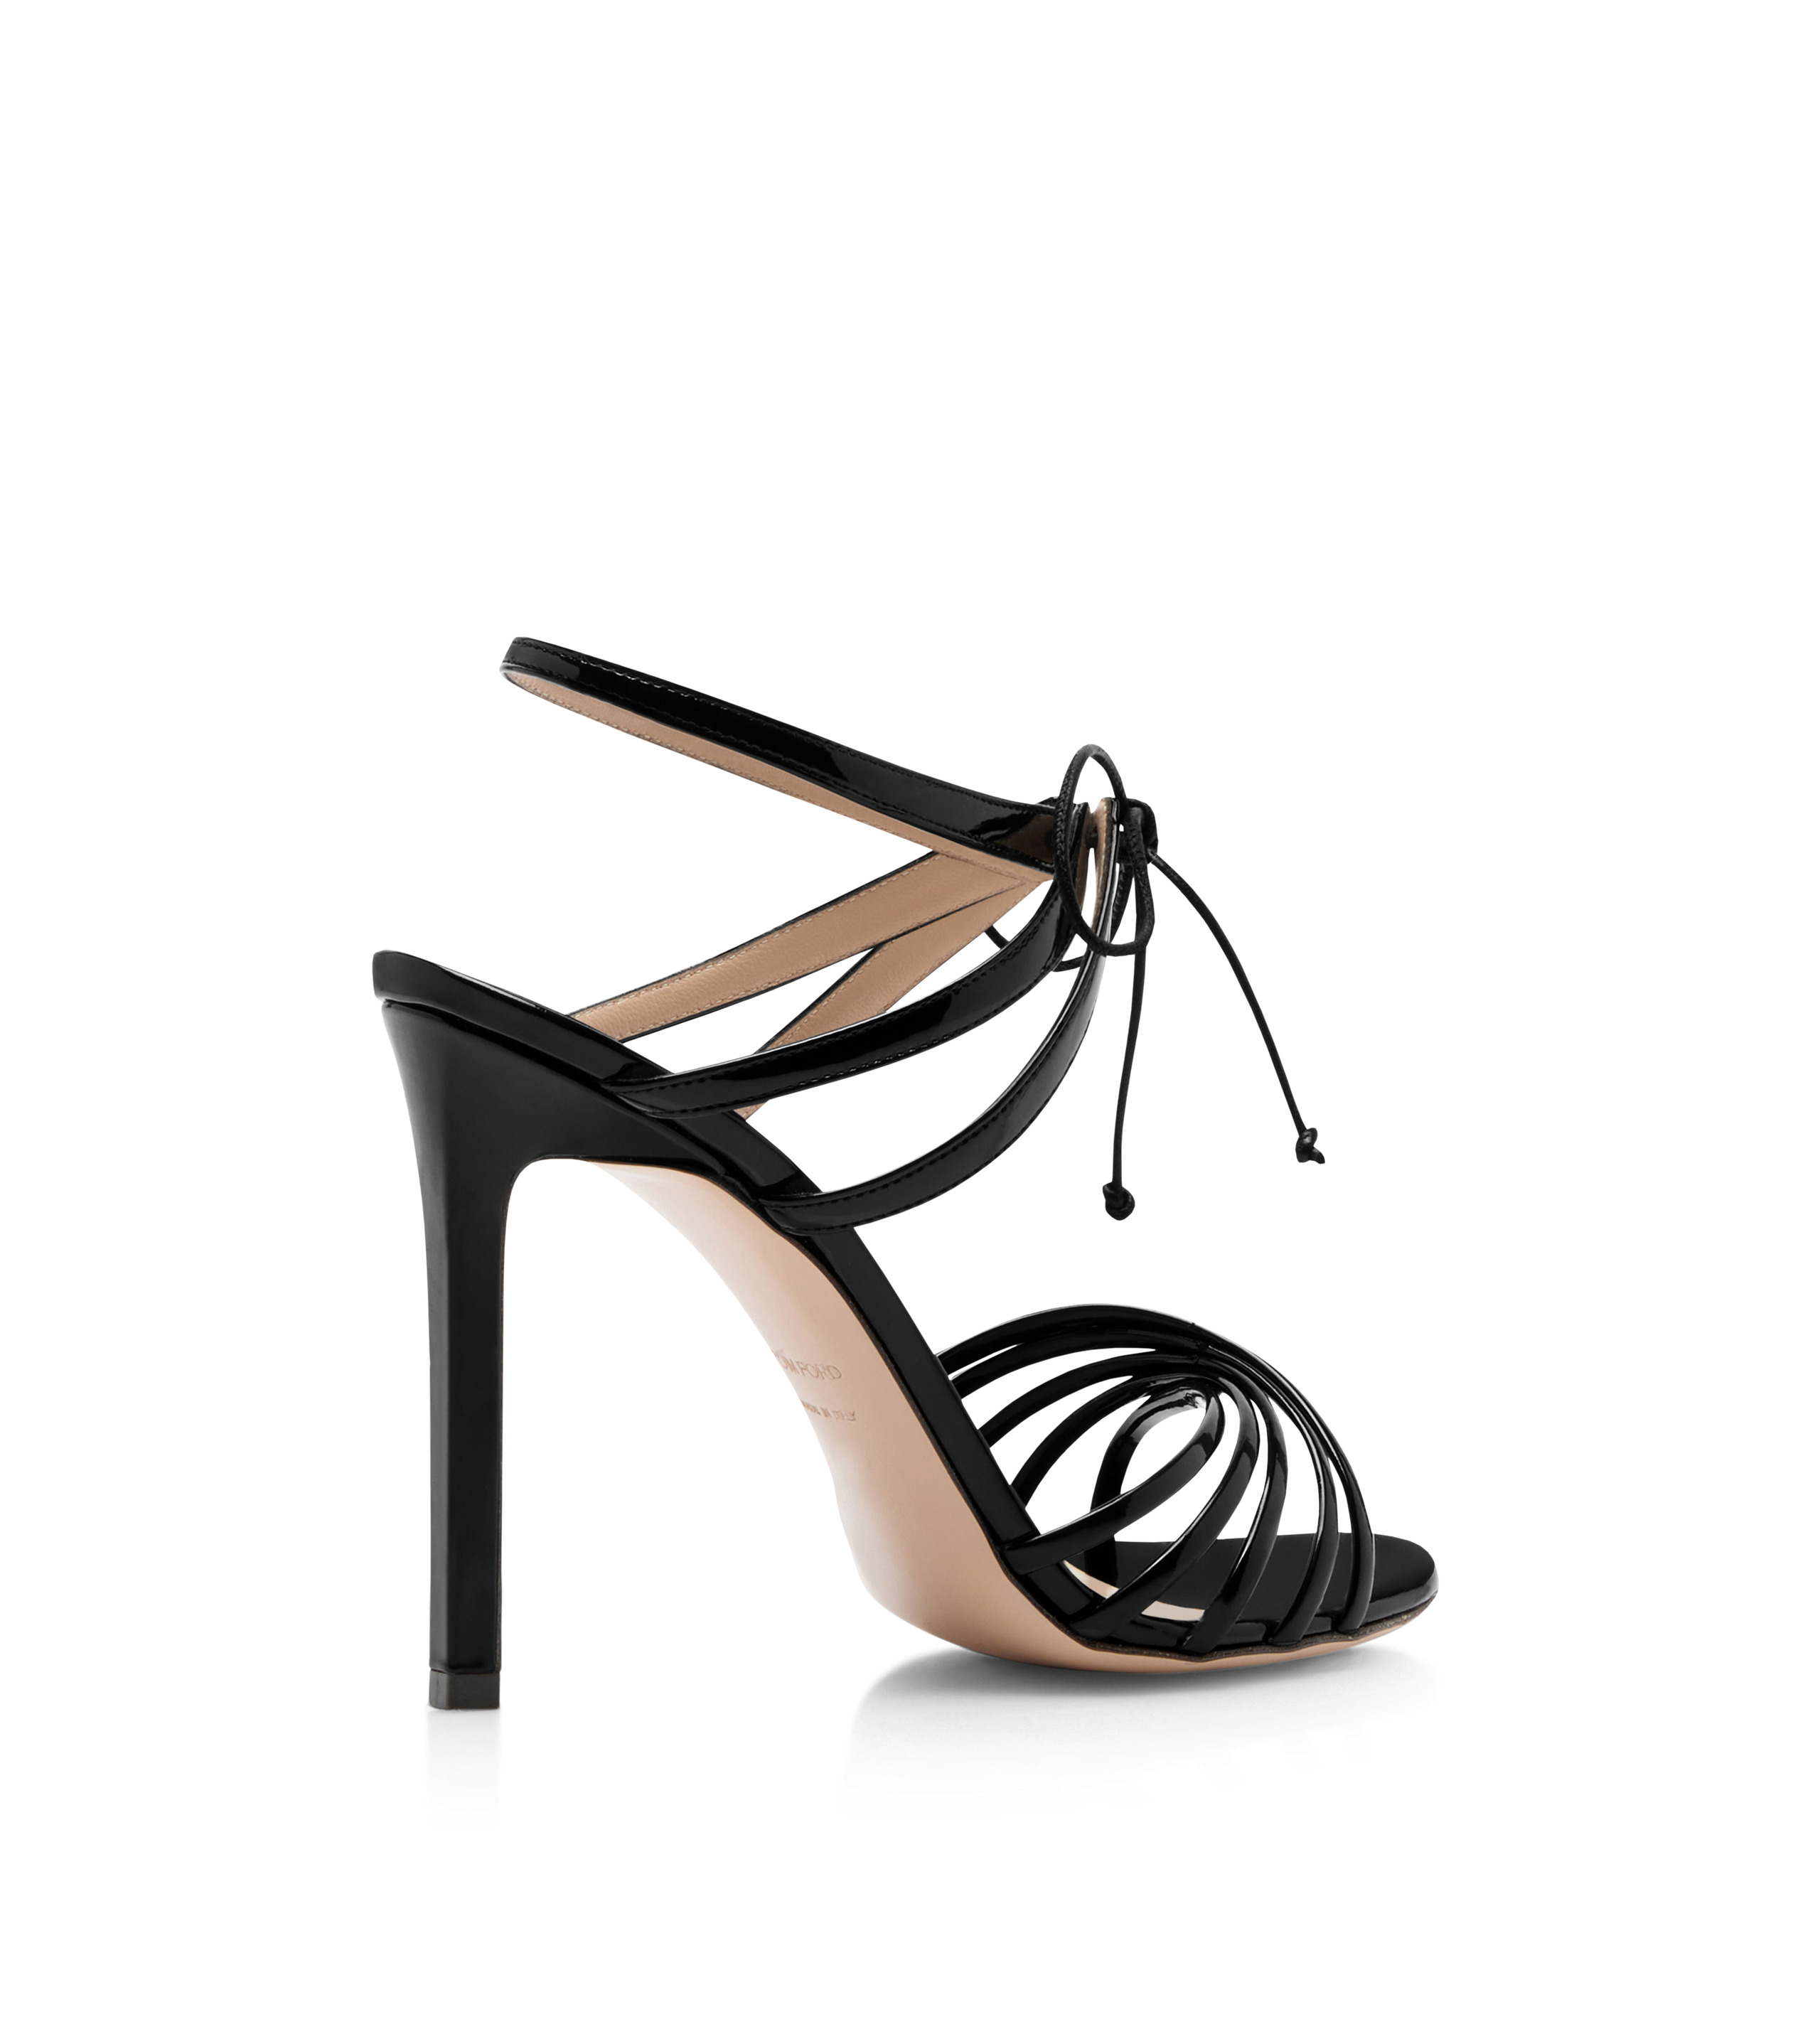 PATENT LEATHER ANGELICA SANDAL - 3